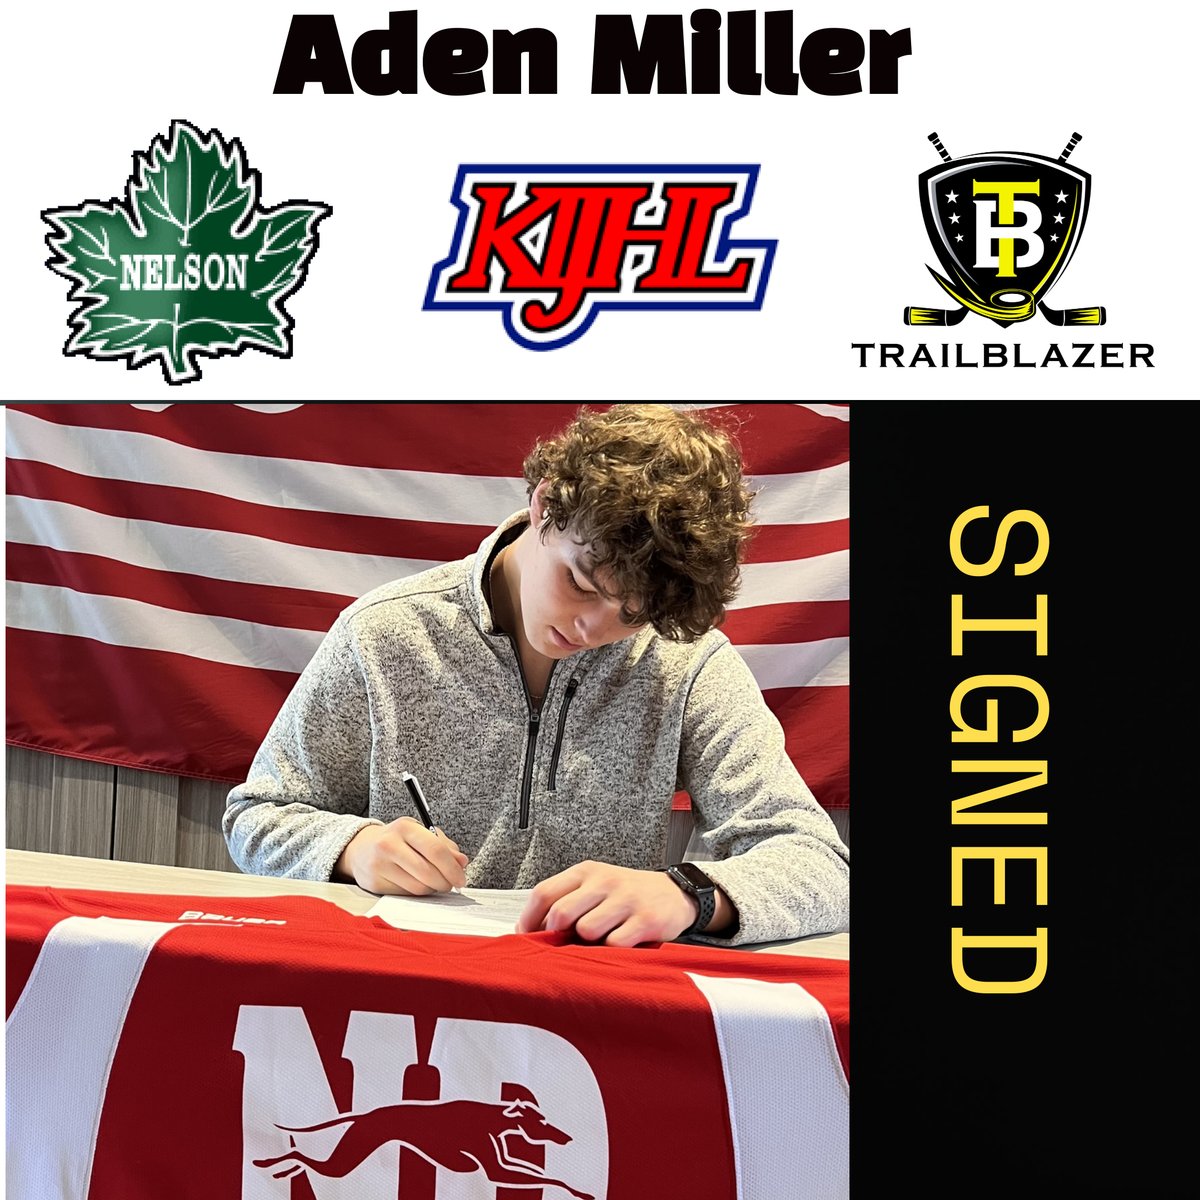 SIGNING ALERT:
Congrats to 2005 D @adenmil18760005 MILLER on signing an LOI with the @KIJHL  @Nelsonleafs ! Aden is from Strathmore, Alberta and is an alumni of @NDHoundsHockey.
#TrailBlazer